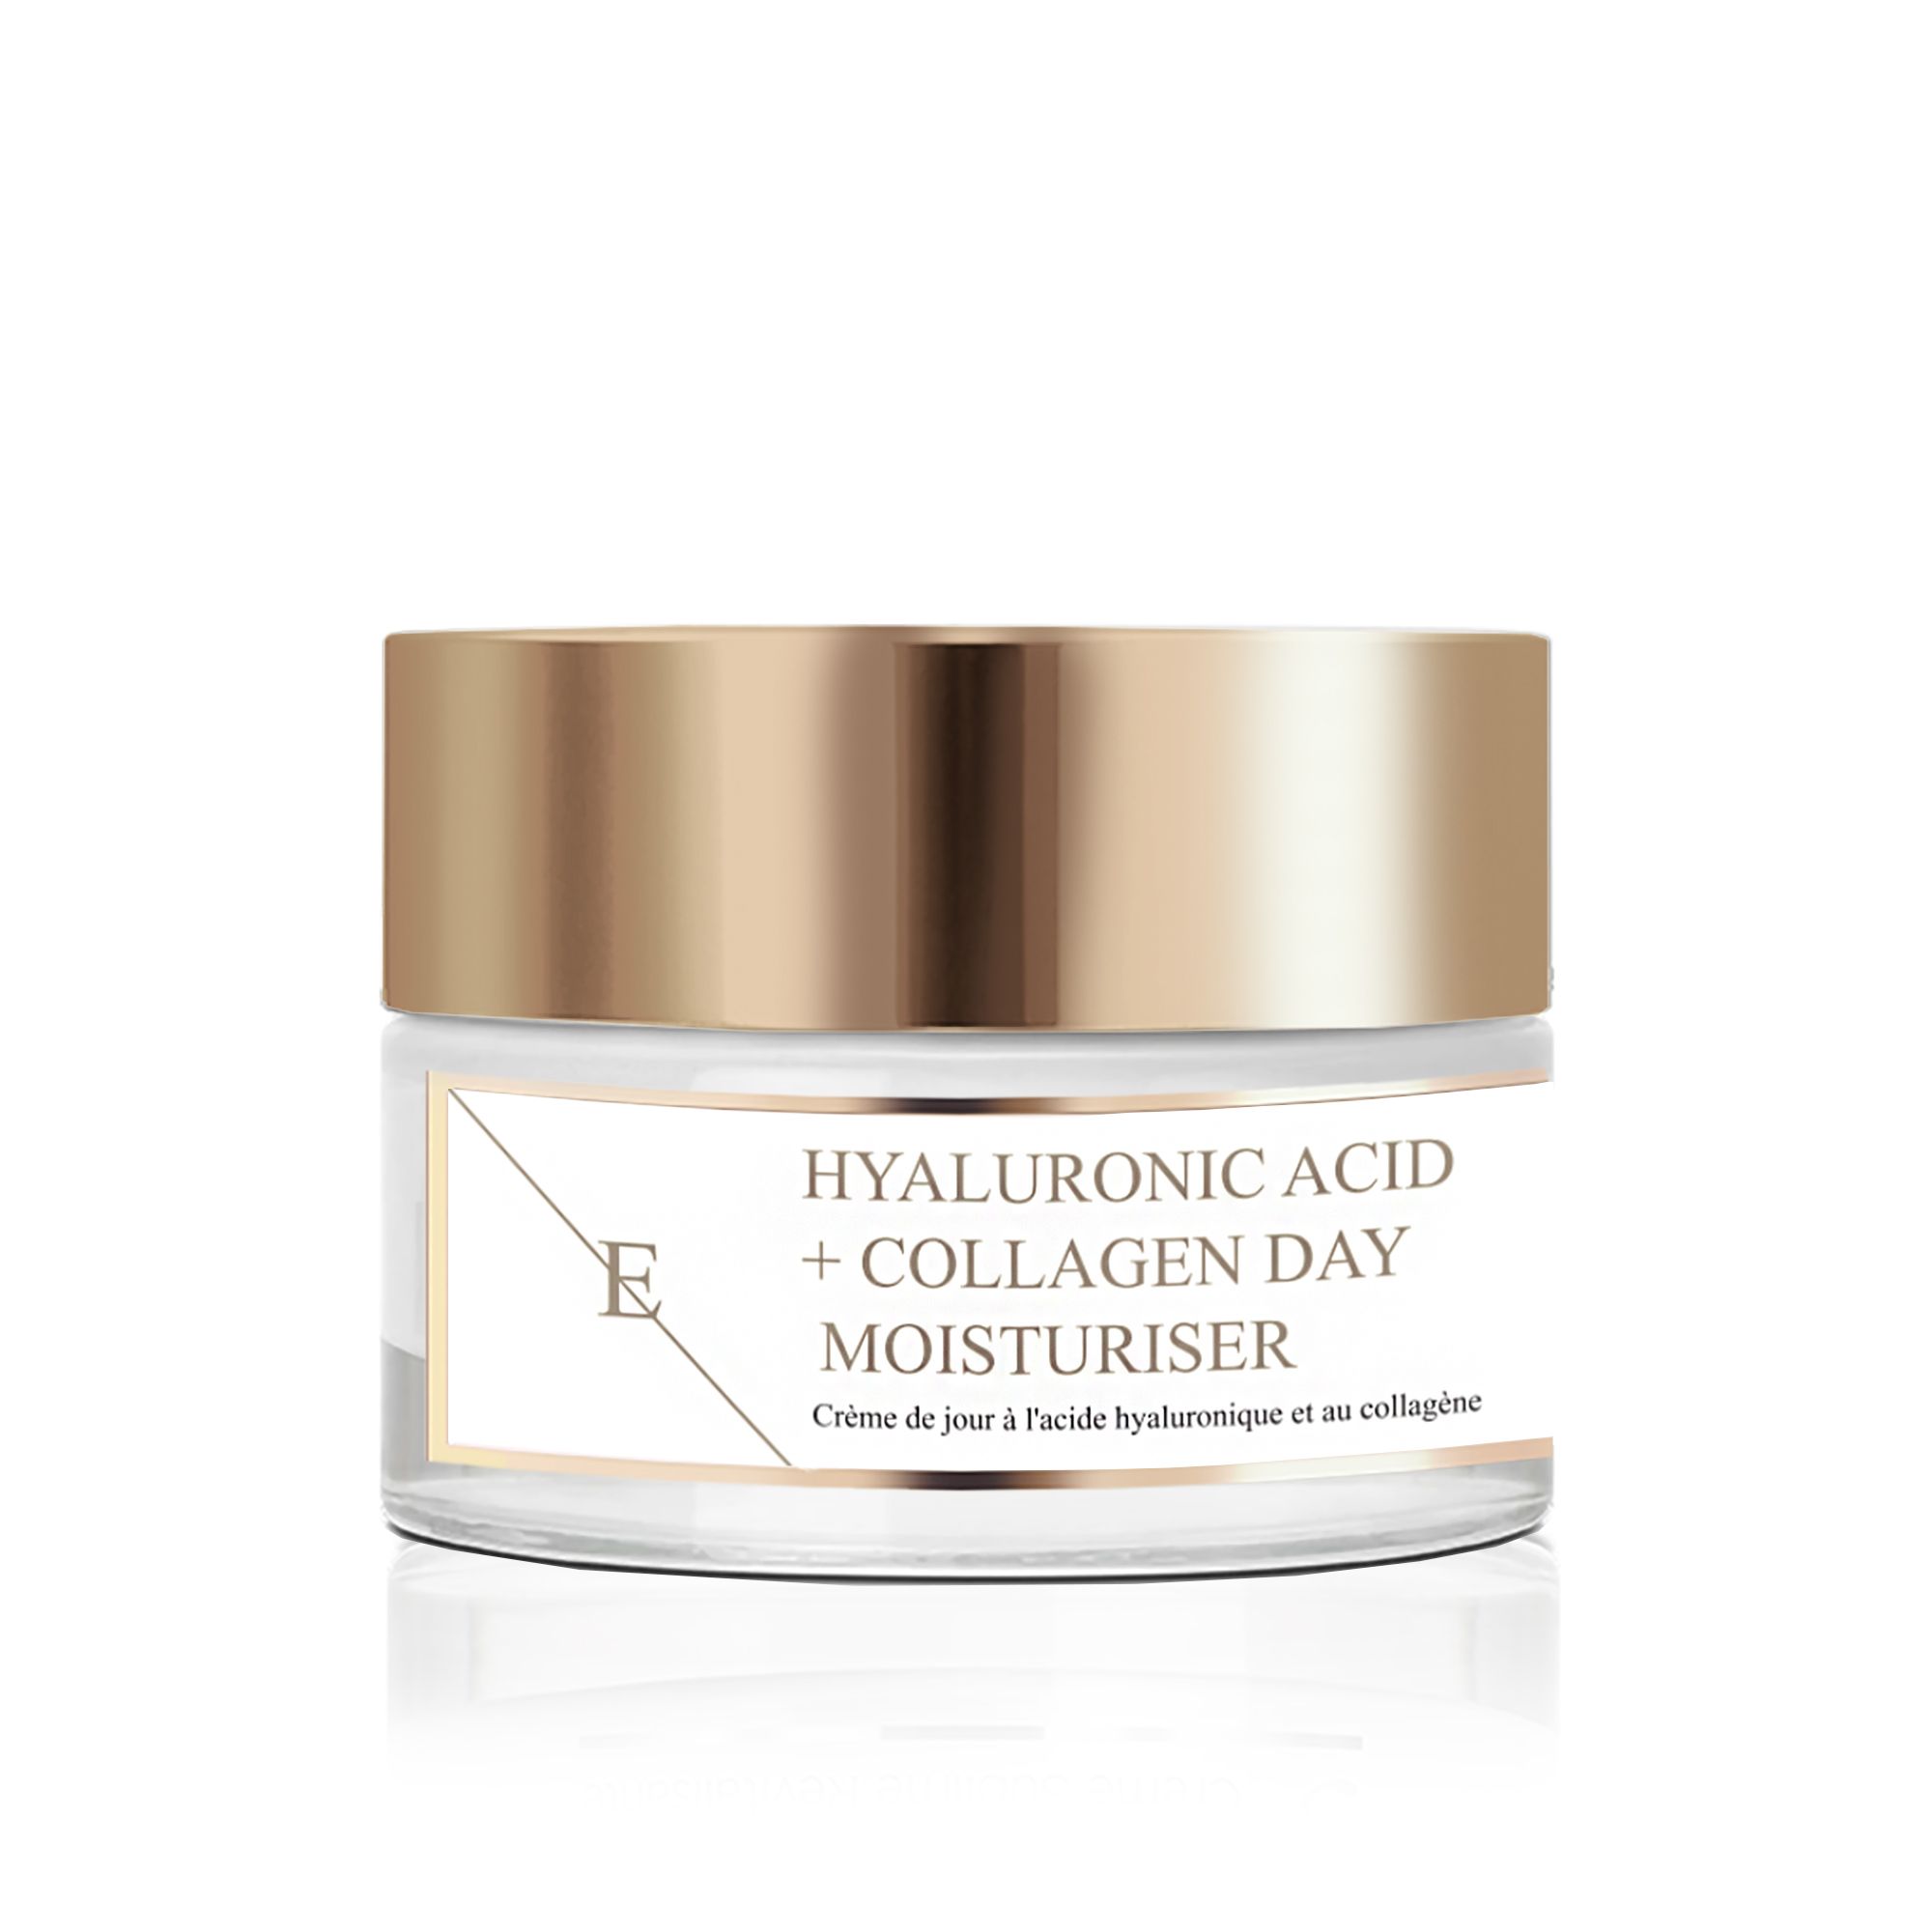 HYALURONIC ACID AND COLLAGEN DAY CREAM 50ml

This anti-ageing day cream contains hydration boosting Hyaluronic Acid and Collagen Amino acids. The cream aims to smoothen the look of dehydration lines for youthful plump and nourished looking complexion.

Key Ingredients:

HYALURONIC ACID
Hyaluronic Acid is naturally found in our skin, as we age our body's natural production of hyaluronic acid slows down. Hyaluronic acid is a key element making the skin looking plump and youthful as it hold moisture 1000 times its own weight. Our hyaluronic acid is called Sodium Hyaluronate and it is smaller size of hyaluronic acid that is able to penetrate and hydrate more deeper levels of the skin than normal hyaluronic acid.

COLLAGEN AMINO ACIDS
Collagen is naturally found in our skin and as we age the production of collagen slows down. As an skincare ingredient collagen aims to boost plumpness and the look of the skin by bringing moisture and hydration to the skin.

SWEET ALMOND OIL
Sweet almond oil is high in natural fatty acids and it nourishes and keeps skin moisturised.

GREEN TEA LEAF EXTRACT
Green tea leaf extract is powerful antioxidant that protects the skin from free radical damage and so aims to contribute to prevention of the signs of premature ageing.

PROVITAMIN B5
Provitamin B5 aims to retain and preserve moisture. Provitamin B5 protects the skin barrier and helps the skin to retain its moisture levels and shield it from irritation. By applying a product with Provitamin B5, you will maximise your skin hydration while improving its softness and elasticity.

Directions for use: Apply pea-sized amount of the cream on cleansed face, neckline and neck in the morning.